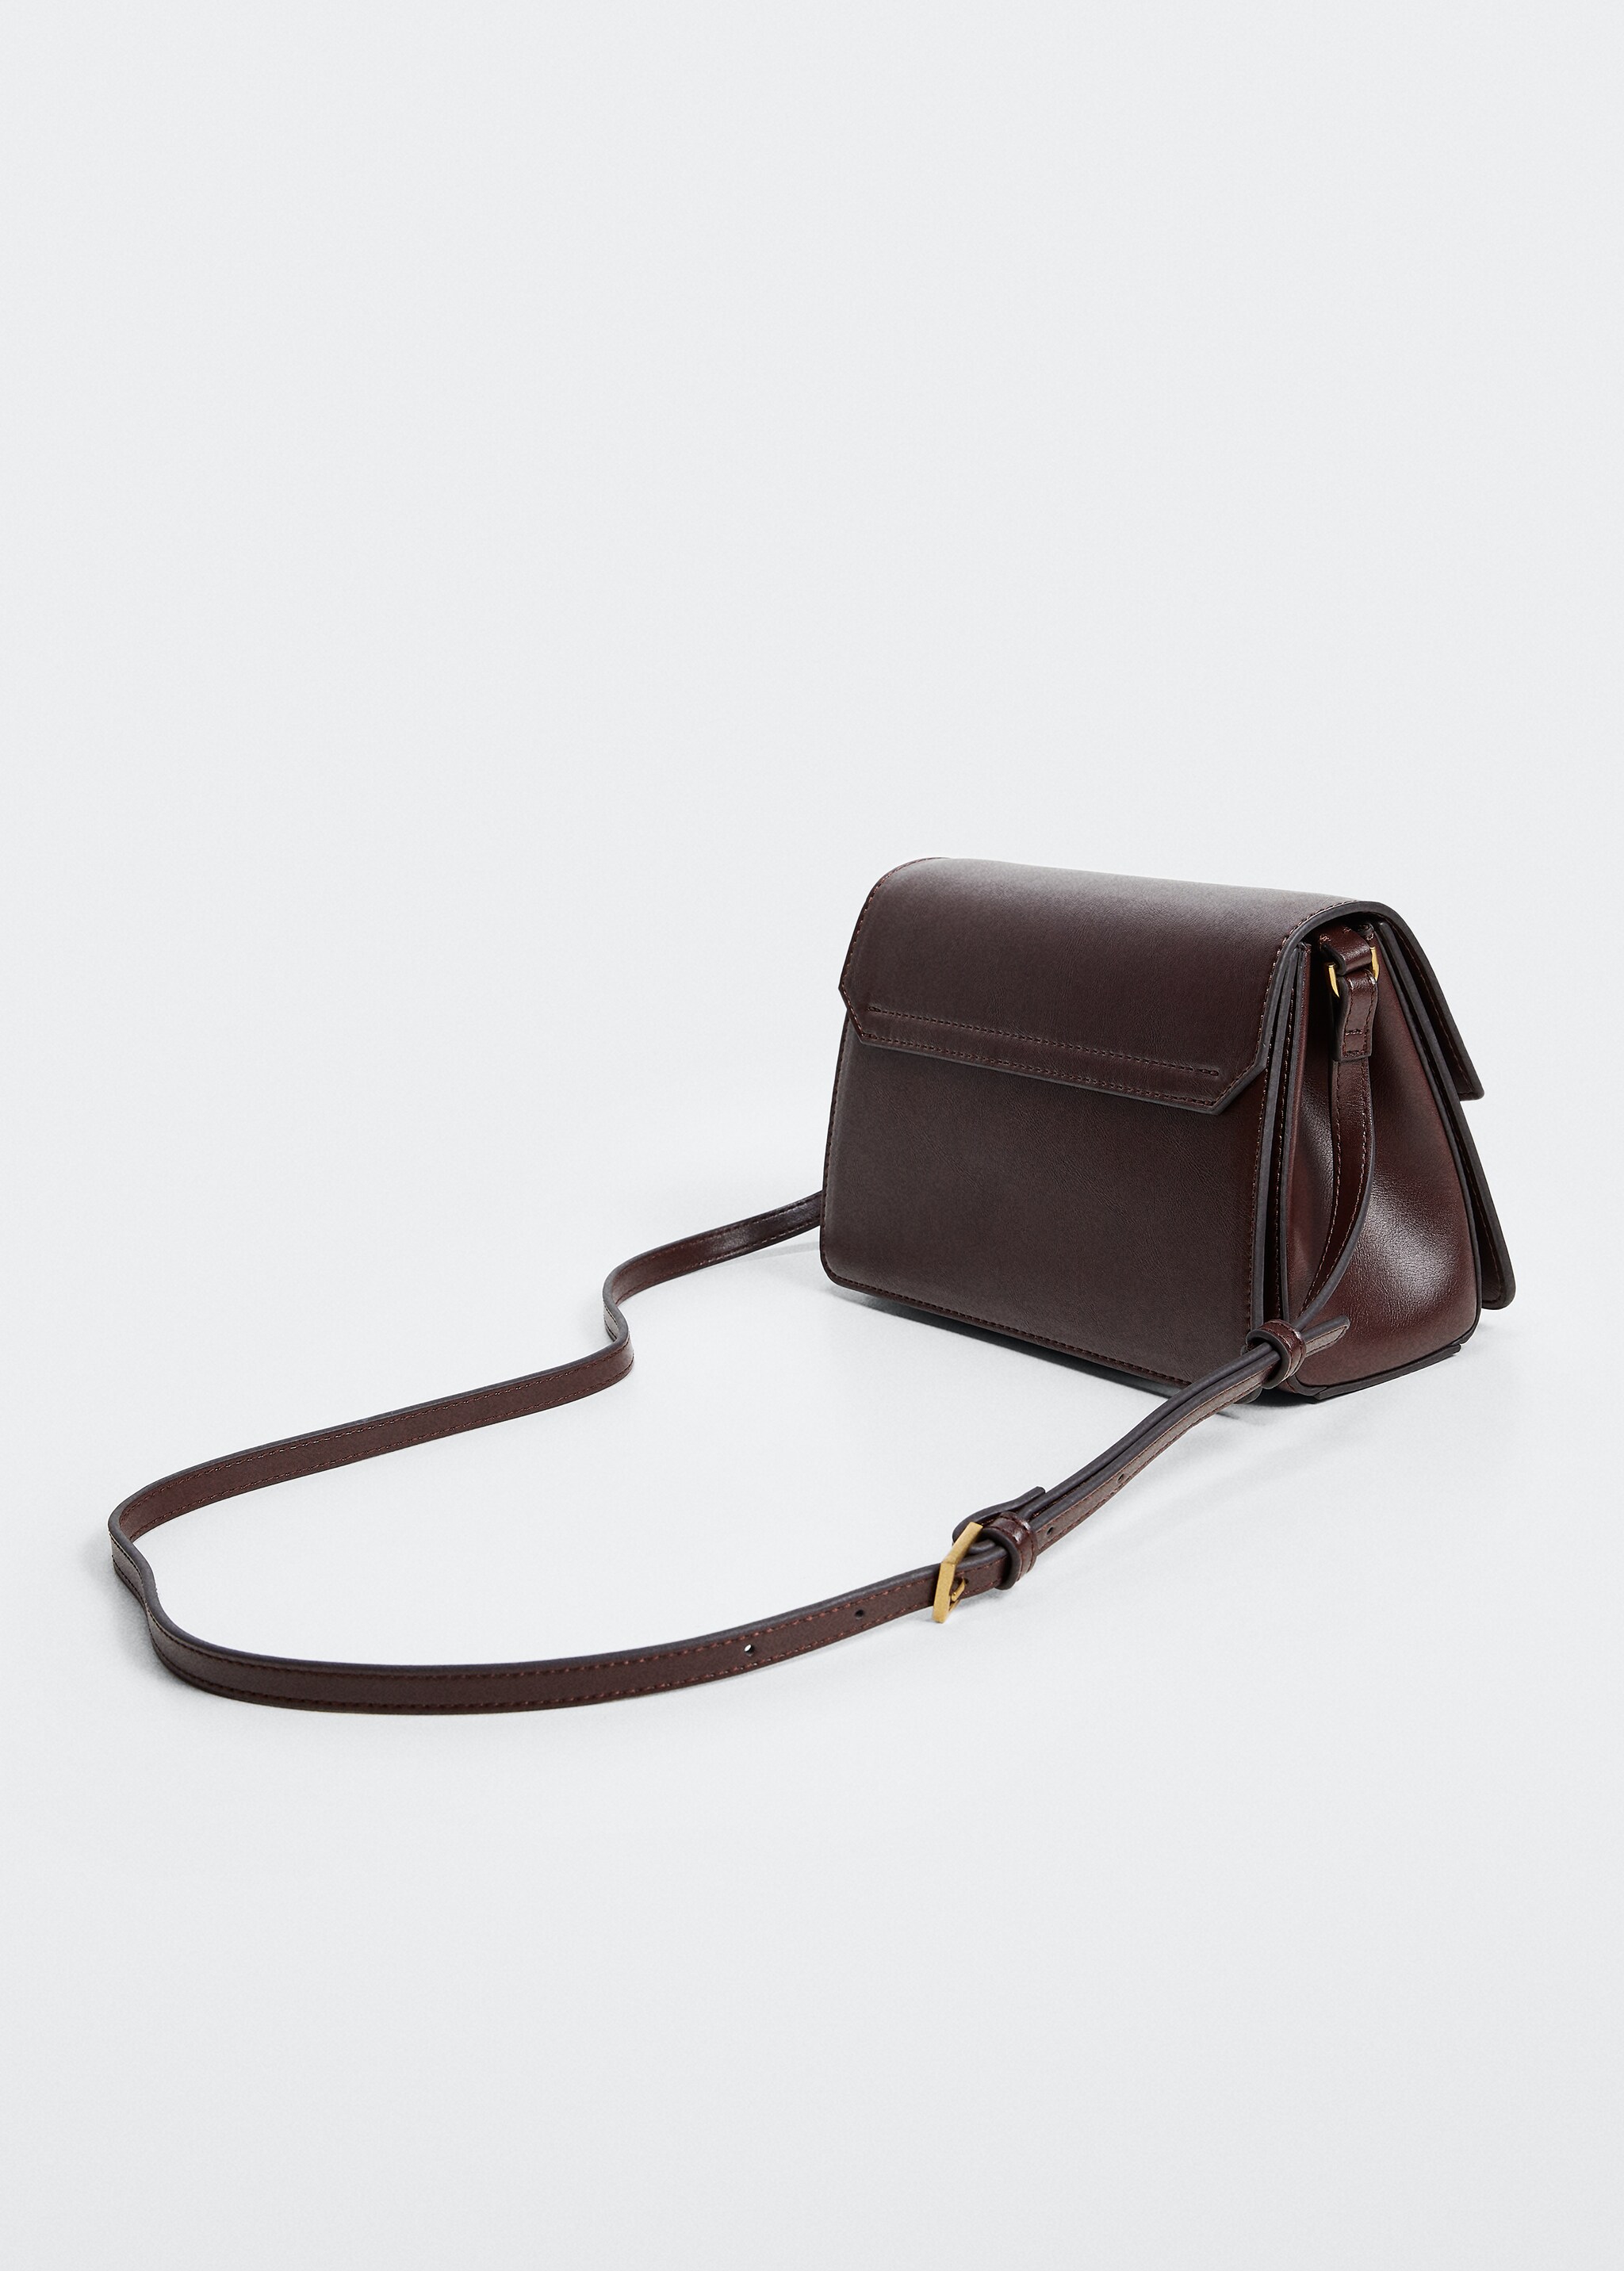 Long strap bag - Details of the article 3